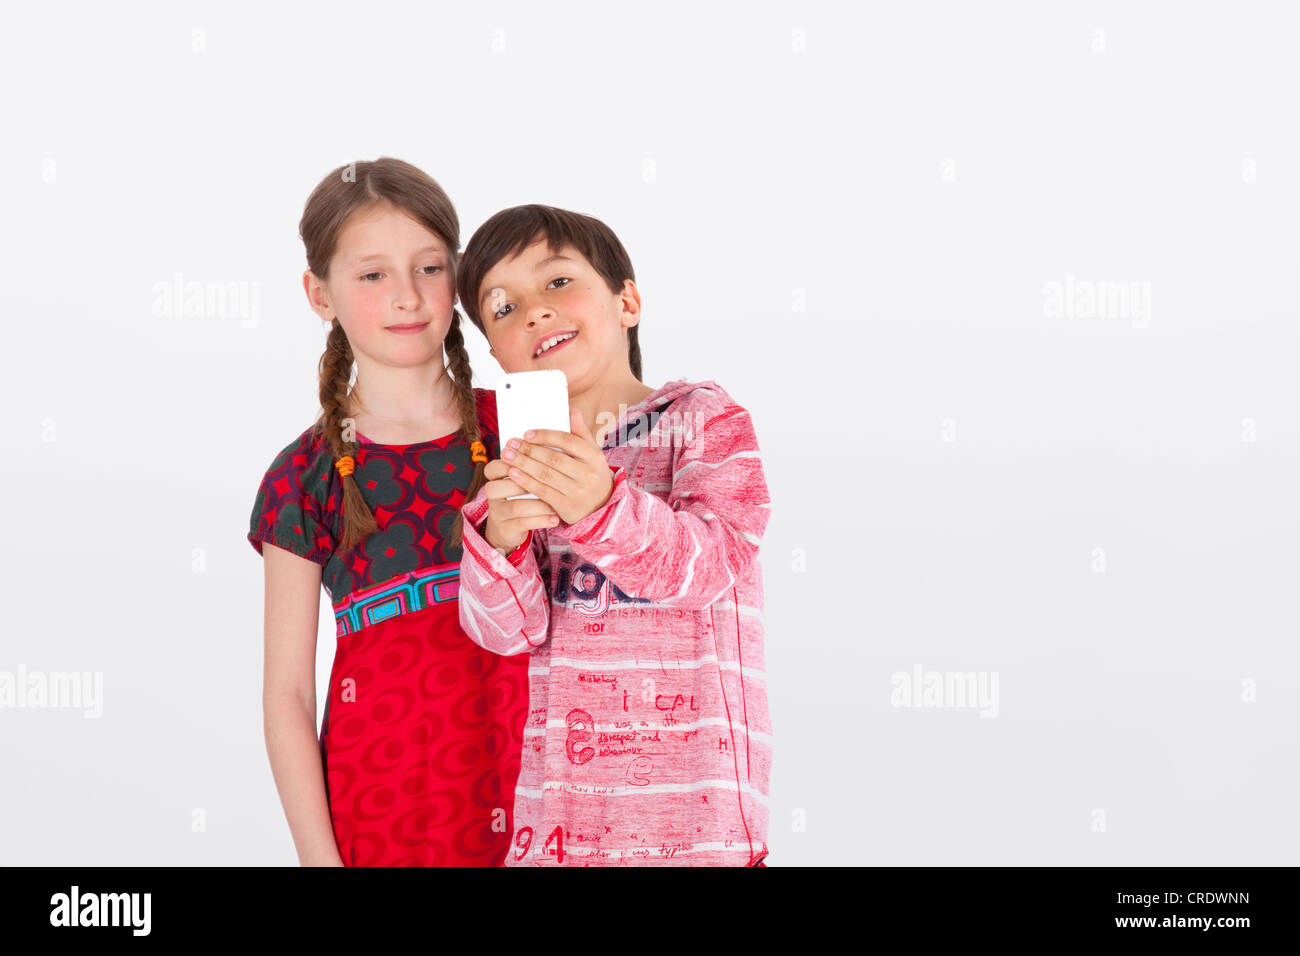 Girl and boy, 9 years, with mobile phone Stock Photo